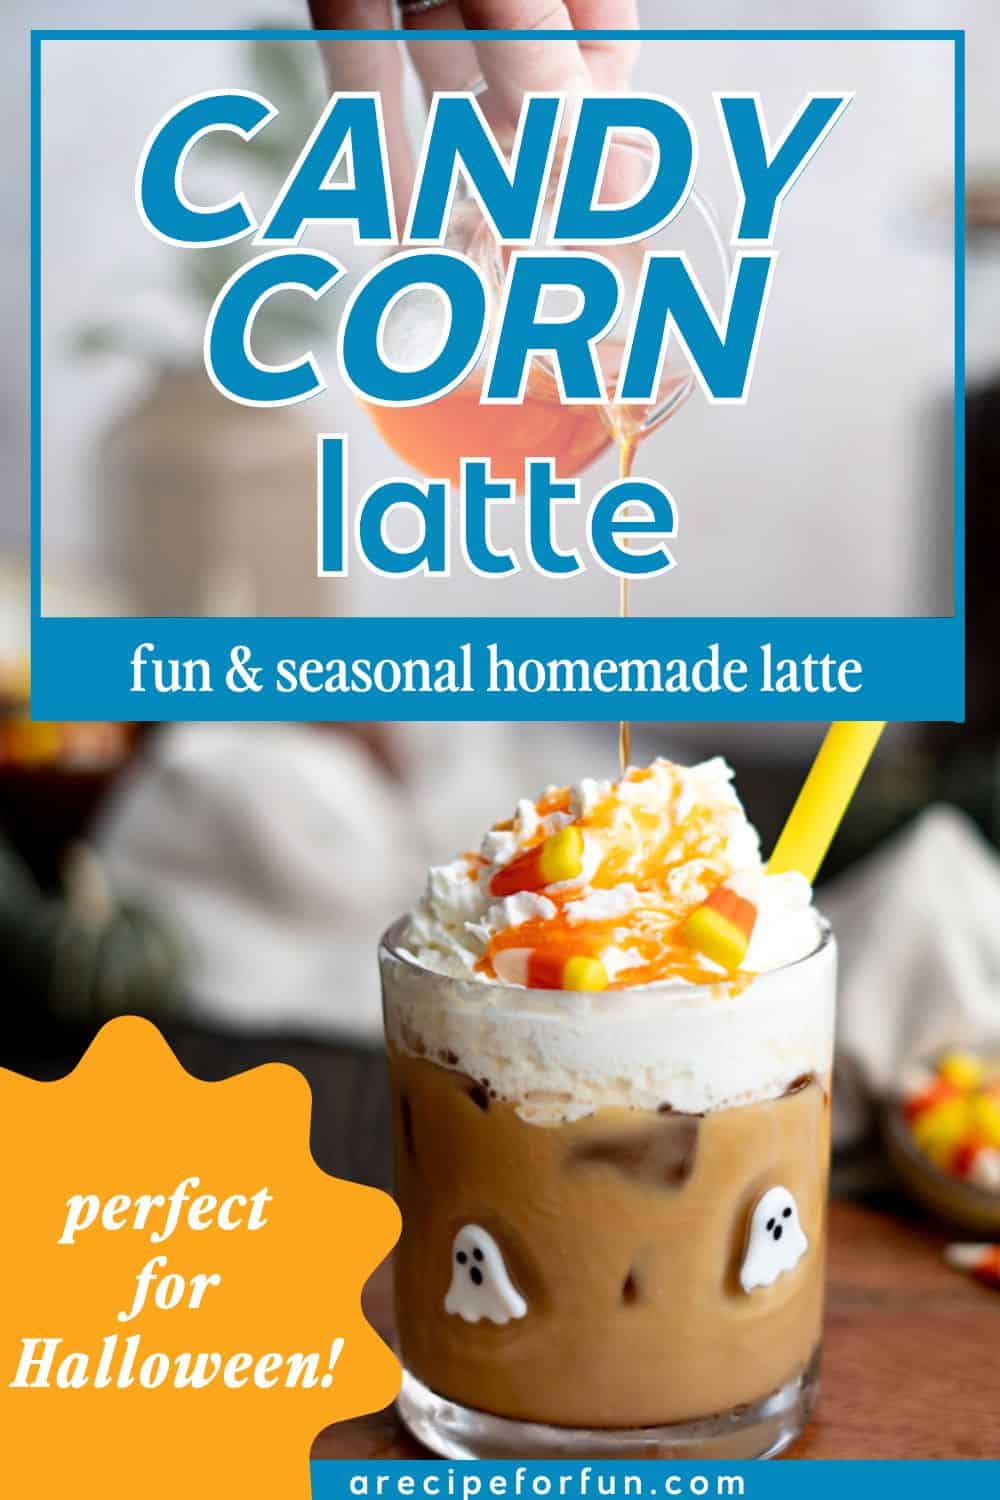 Pinterest Pin for a post about a recipe for a candy corn latte.